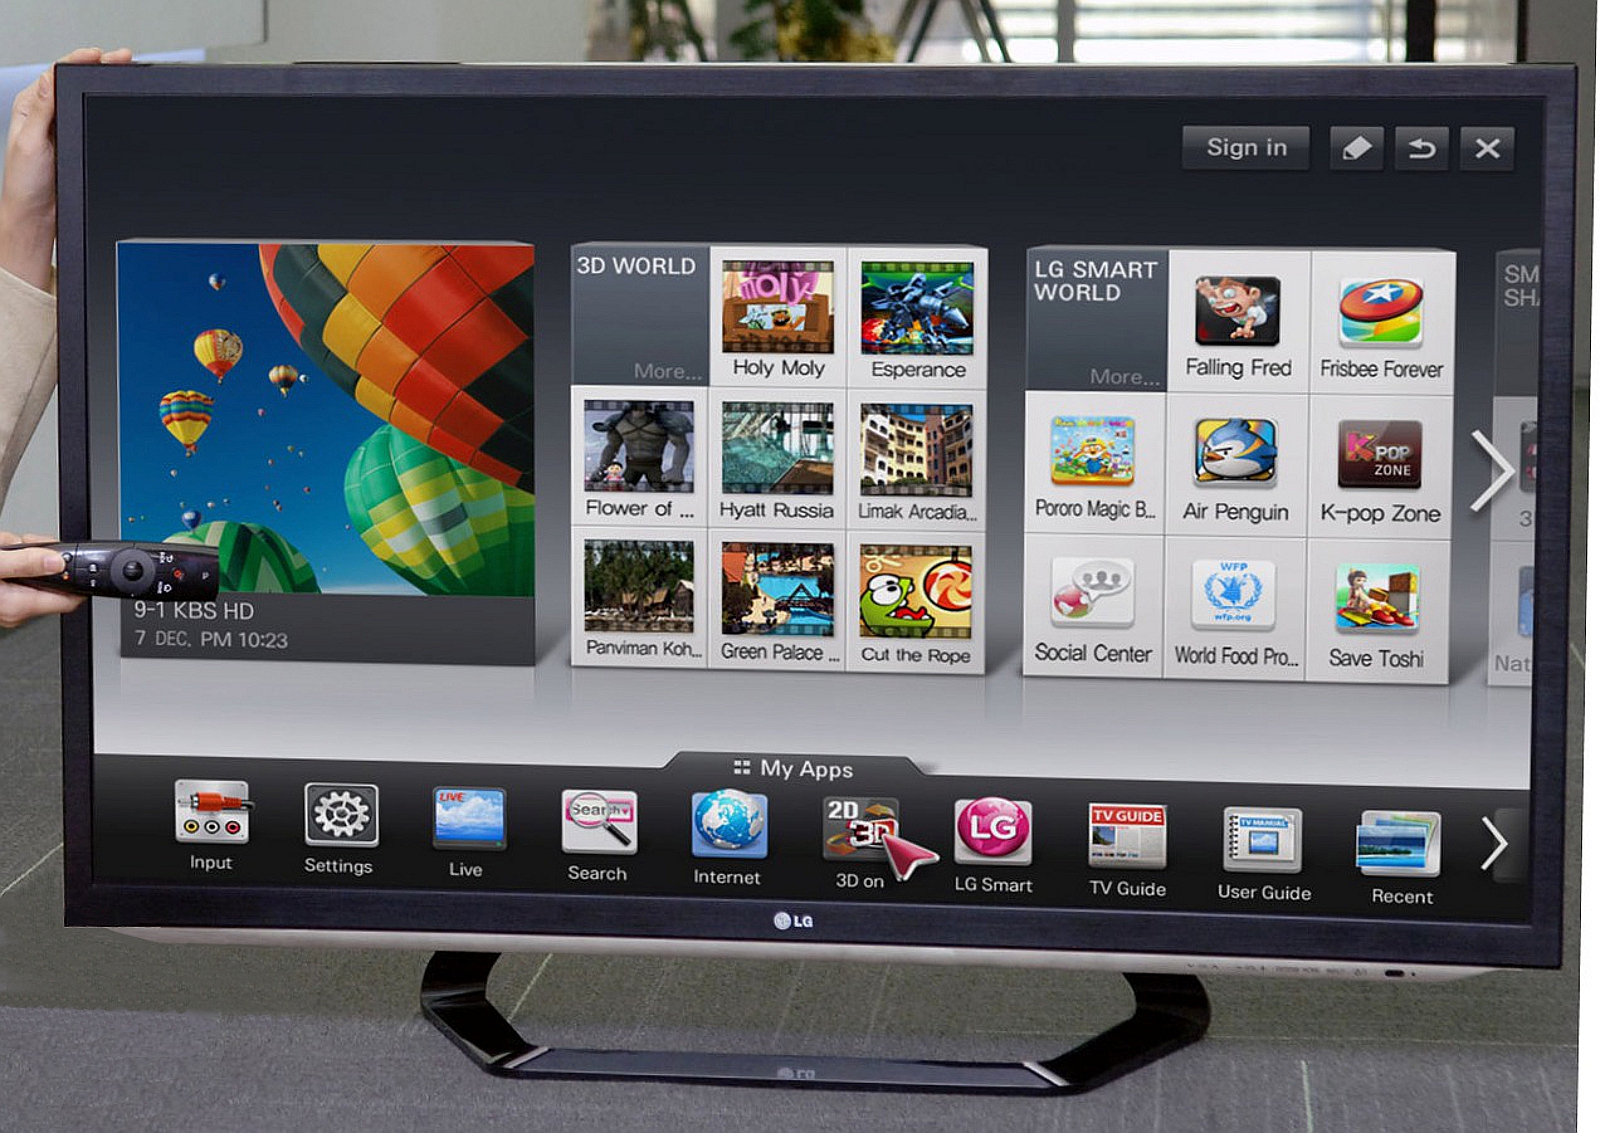 lg-unveils-new-smart-tv-features-for-2012-focusing-on-rich-content-and